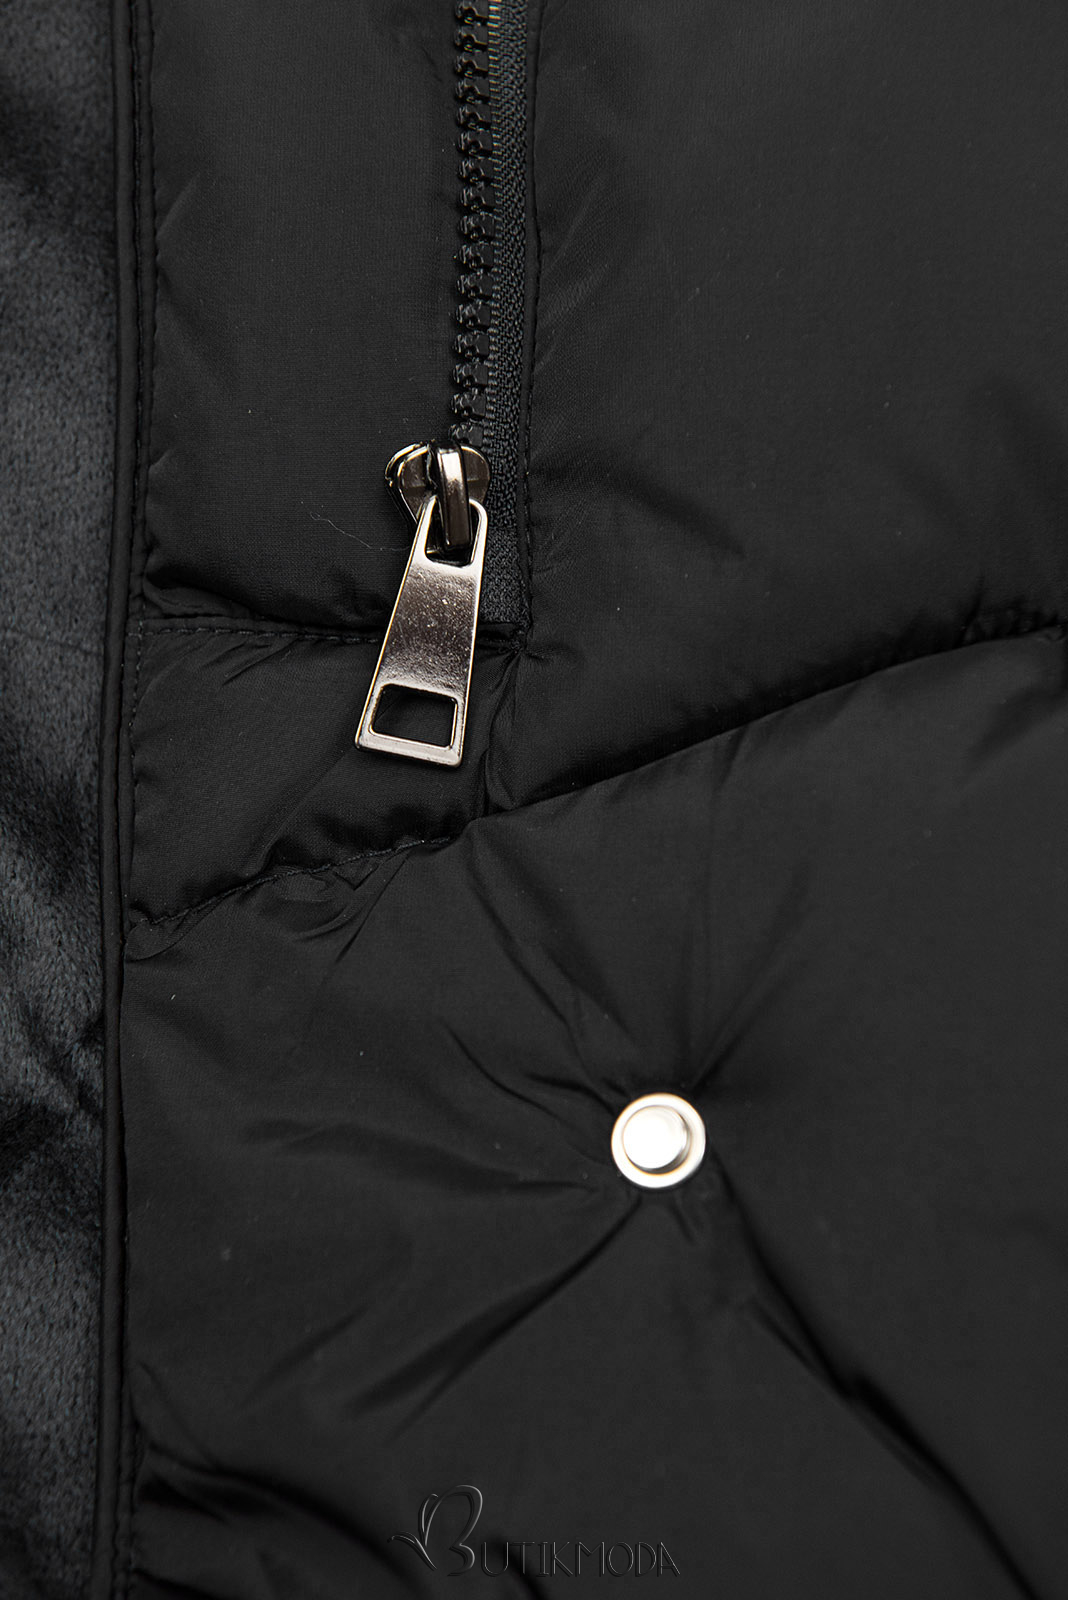 Black winter jacket with a high collar